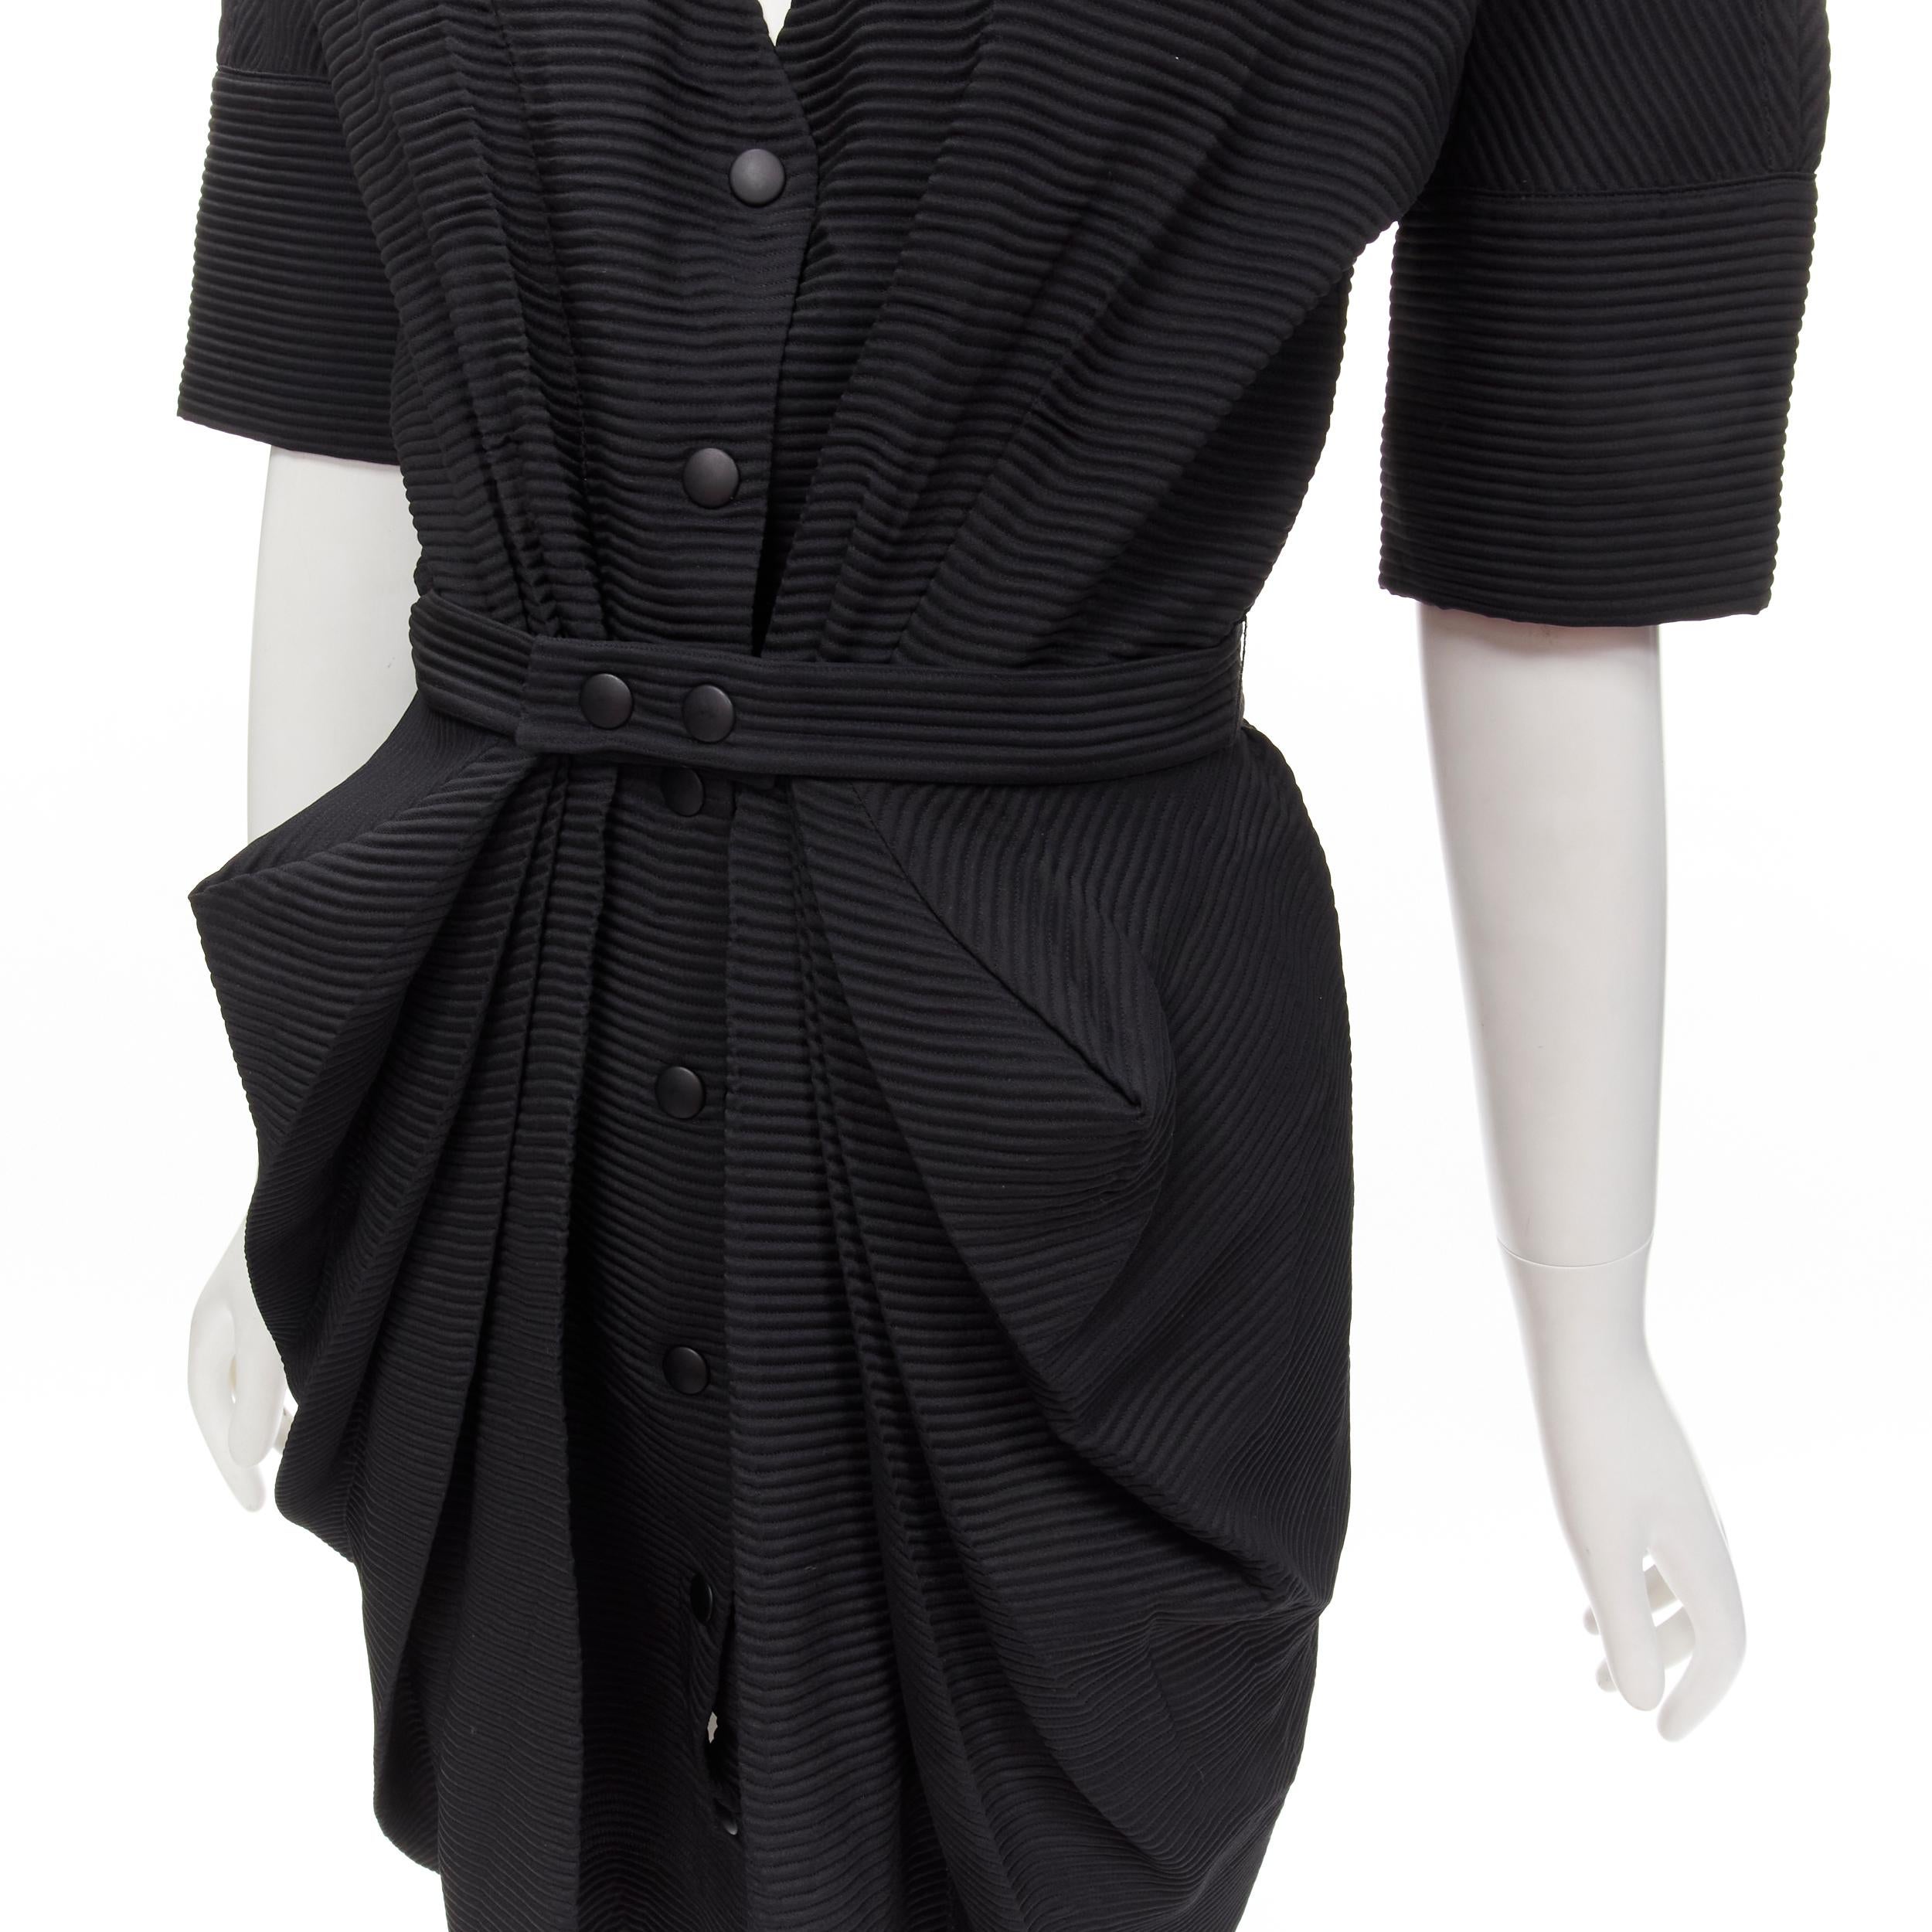 BALENCIAGA 2009 plunge neckline button front gathered pleat short dress FR36 S
Brand: Balenciaga
Designer: Nicolas Ghesquiere
Collection: 2009 
Material: Polyester
Color: Black
Pattern: Solid
Closure: Snap Buttons
Extra Detail: Pleated ribbed